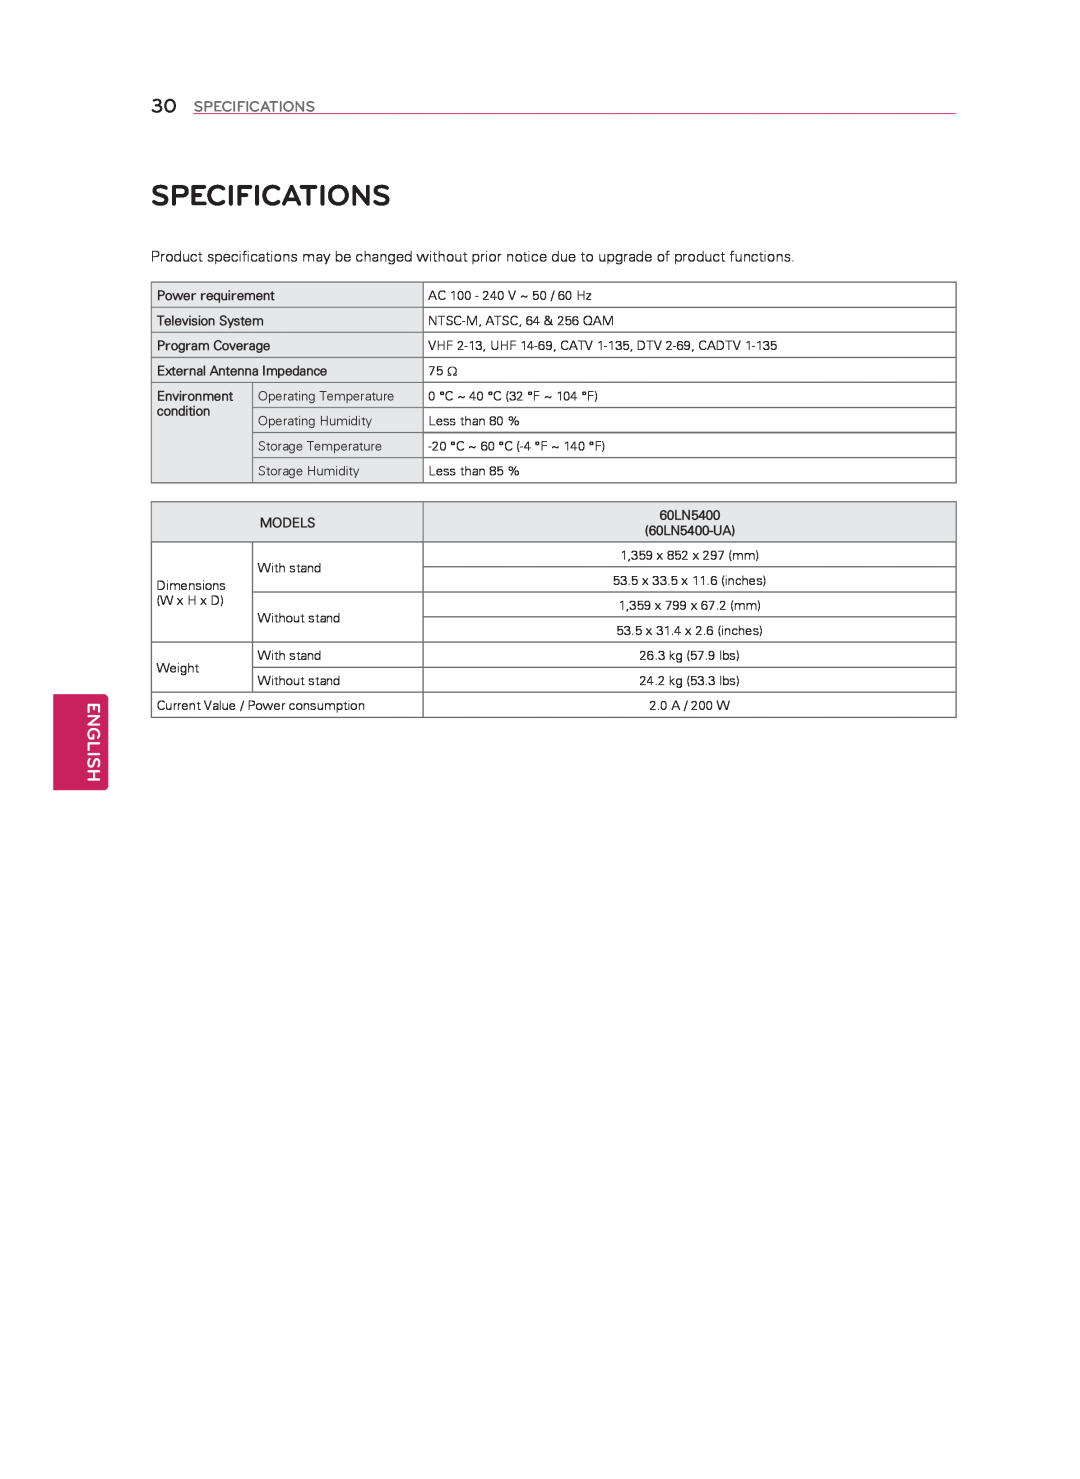 LG Electronics 60LN5400 owner manual Specifications, English 